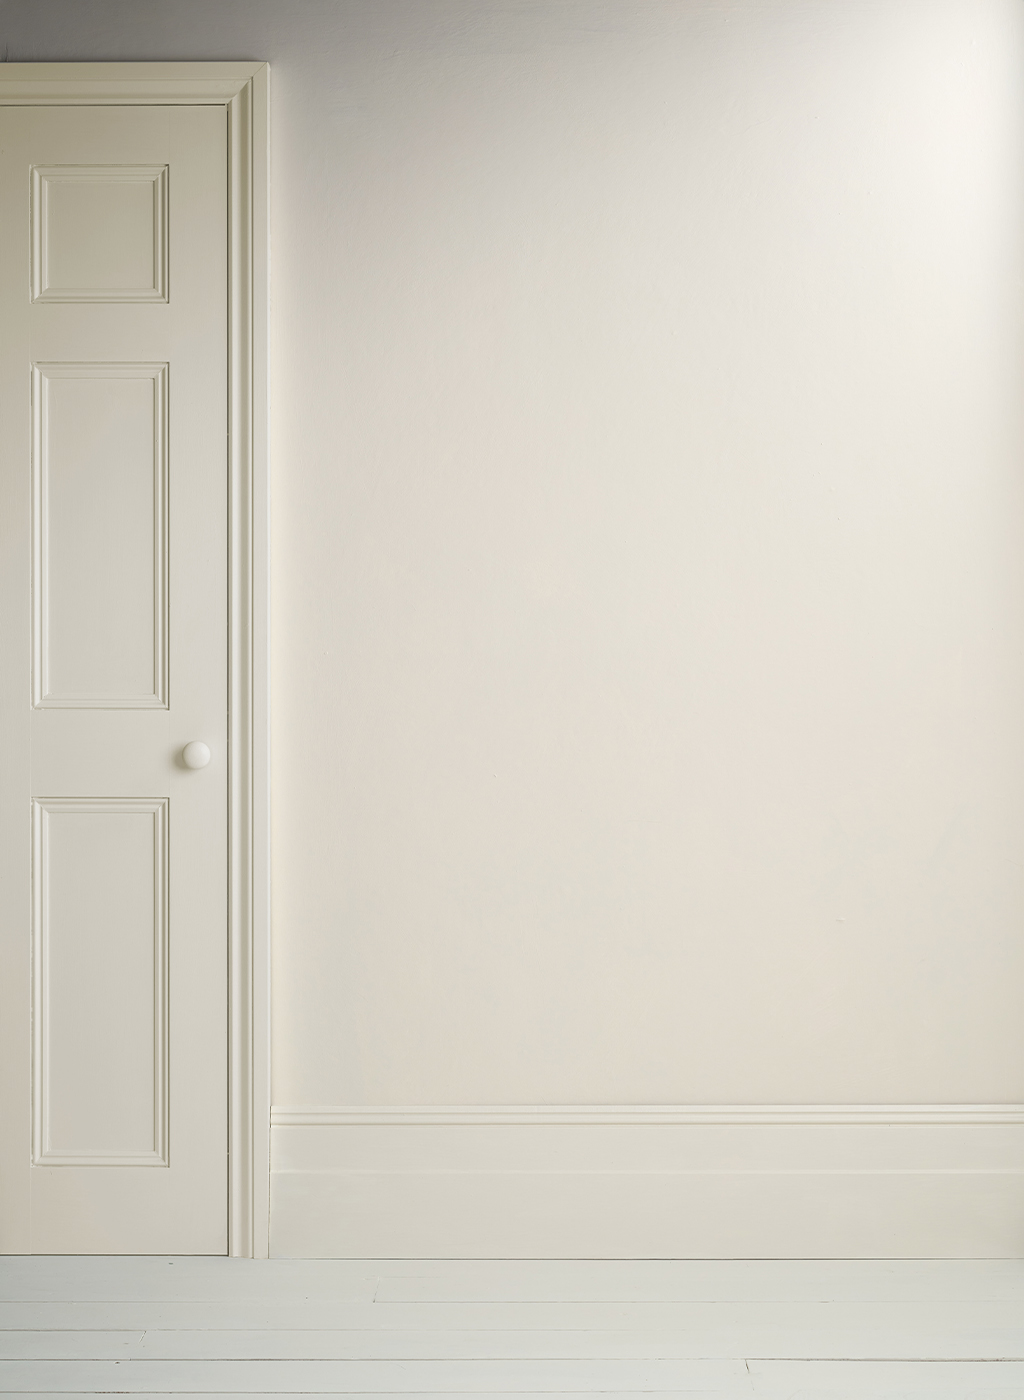 Lifestyle Image of Annie Sloan Satin Paint in Old White used on door and skirting